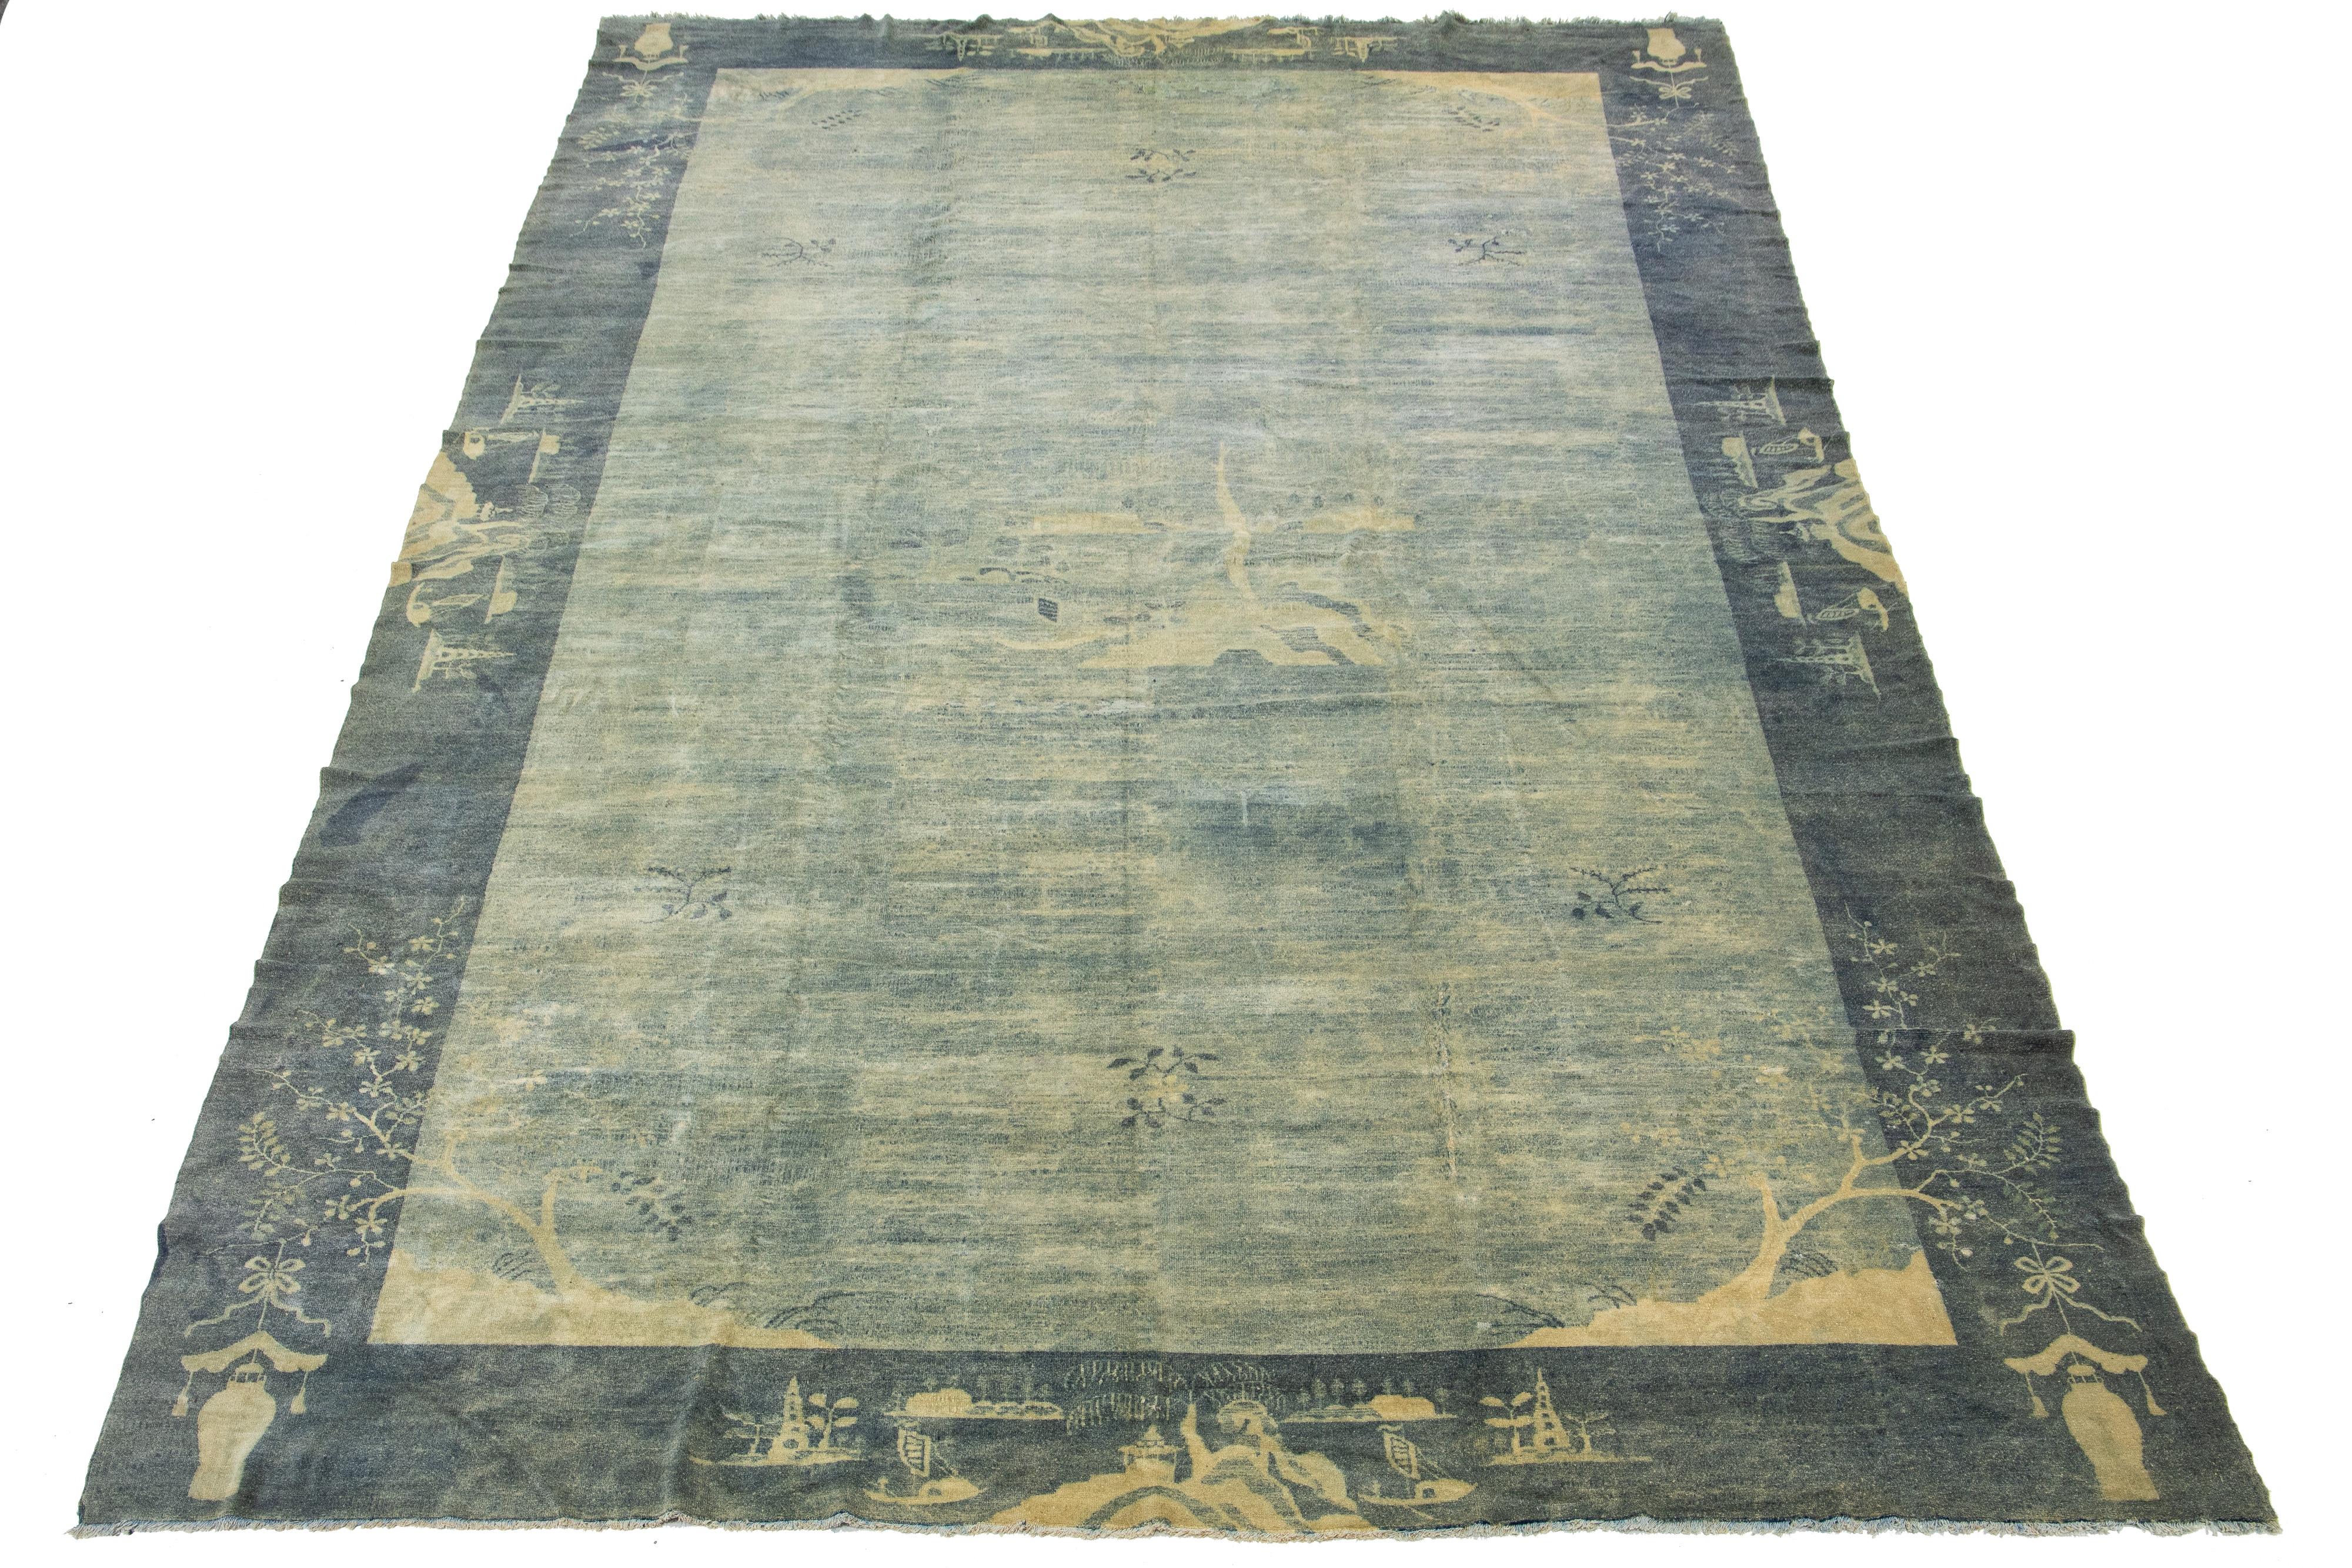 This Art Deco Chinese rug is made of hand-knotted wool and features a gray and beige field with a stunning designed frame.

This rug measures 11'10